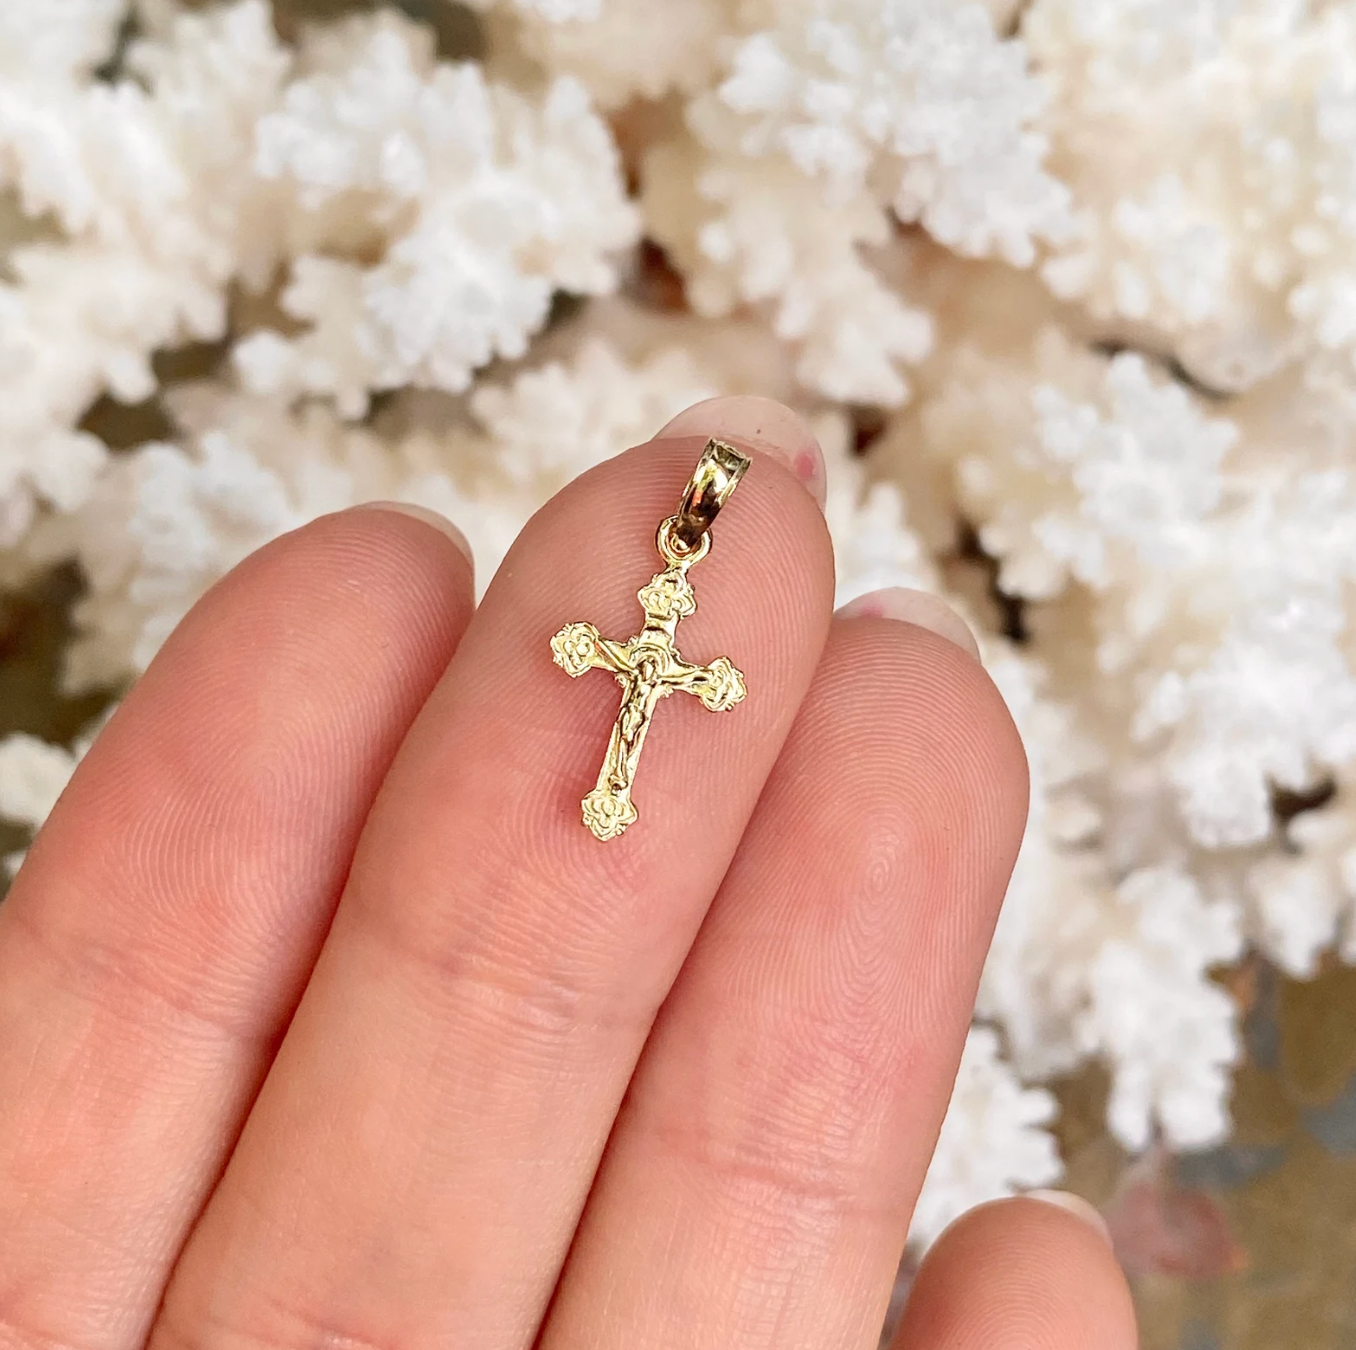 Cross Charms for Necklaces Jewelry Making, Petite Crucifix Charm, 1.5 In